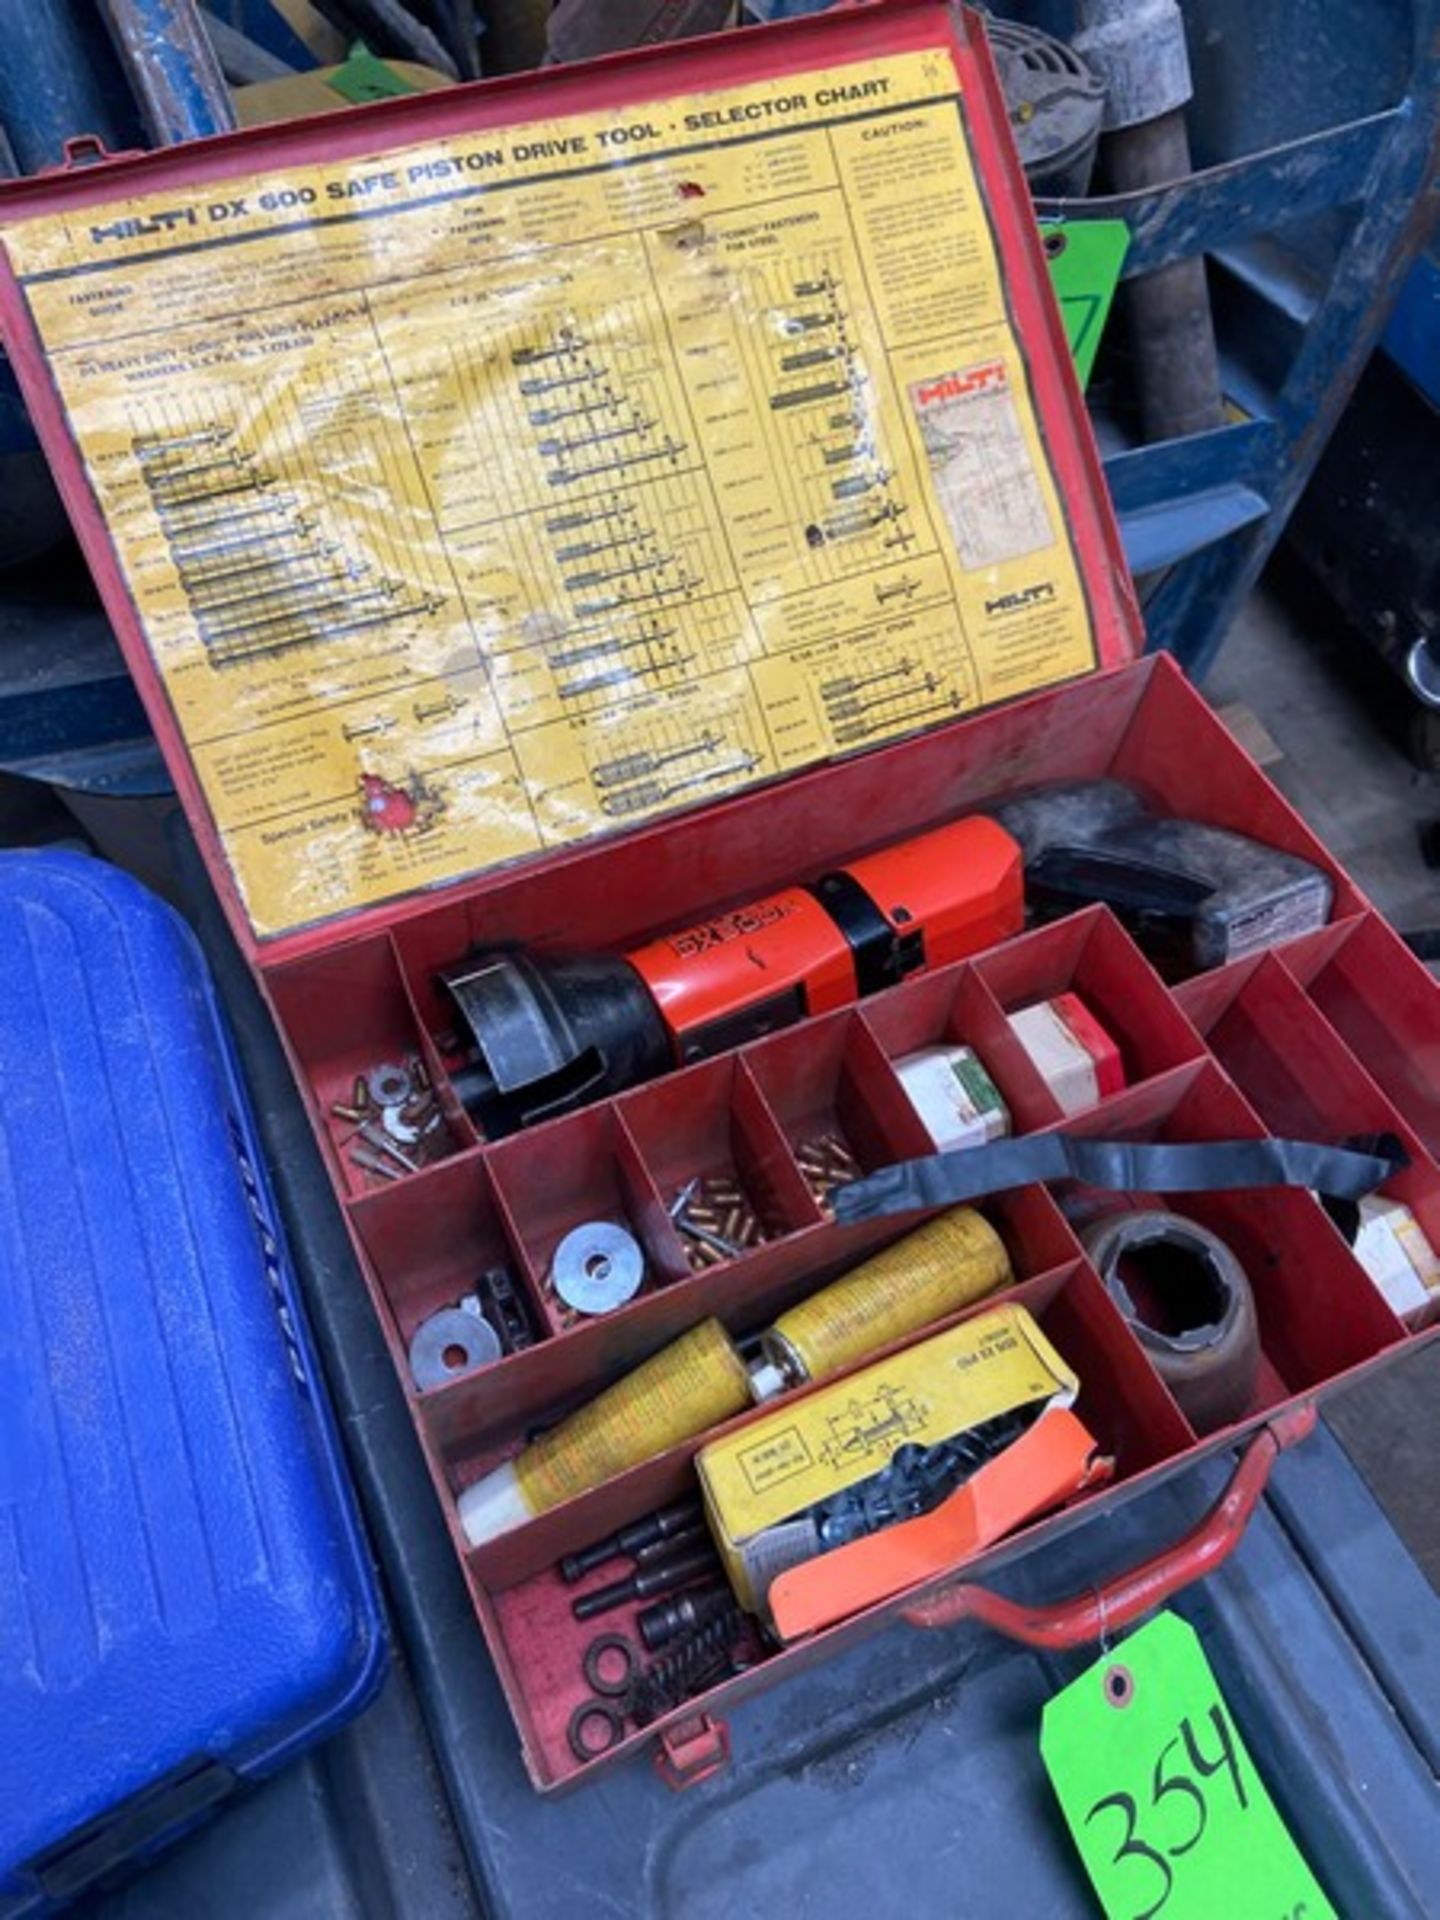 HILTI Fastening Tool, M/N DX600N, with Hard Case (LOCATED IN MONROEVILLE, PA) - Image 2 of 4